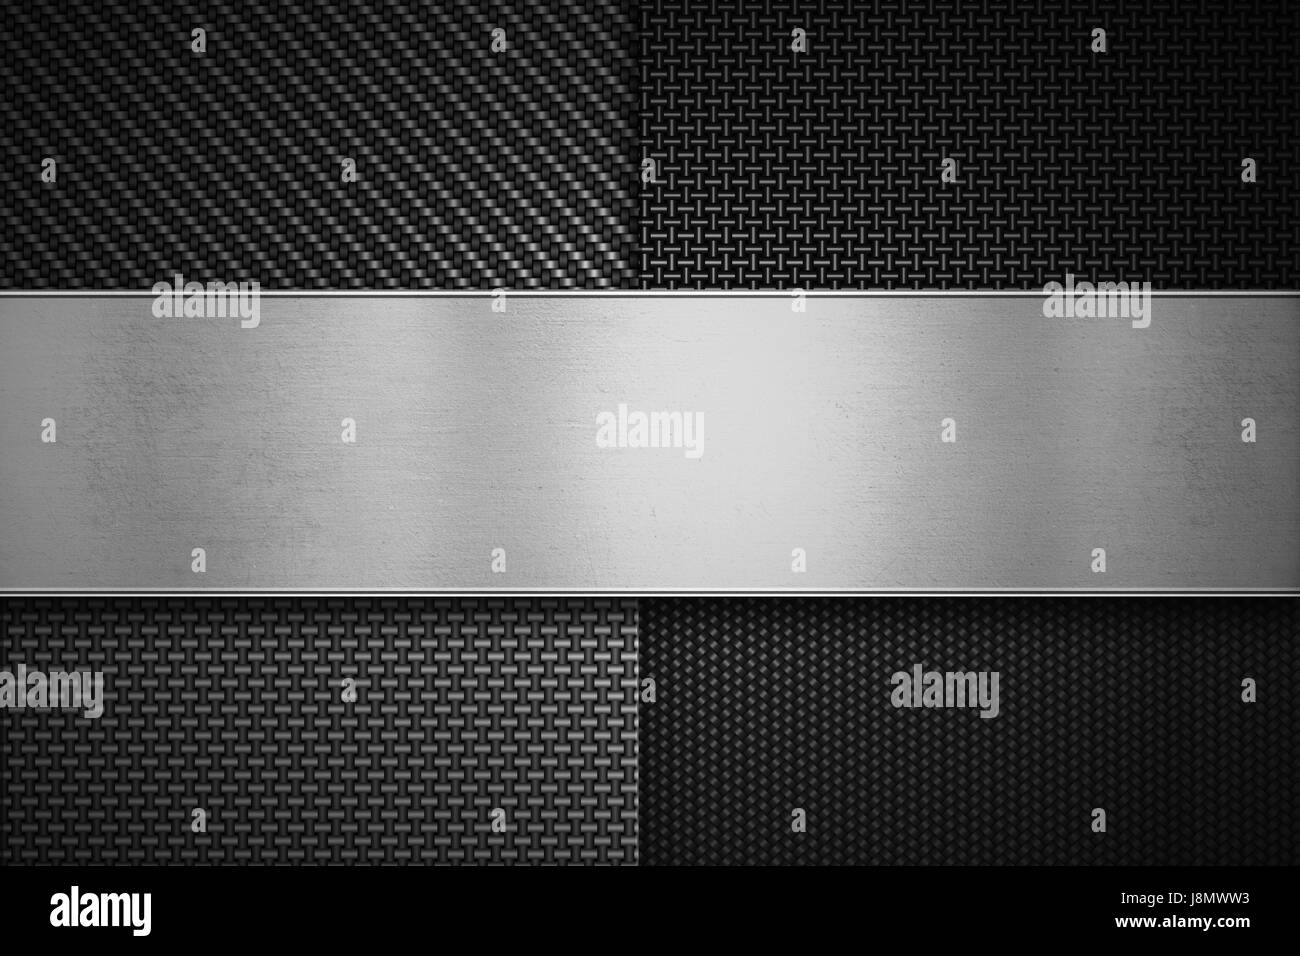 Four types of modern carbon fiber with polish metal plate on center texture material design for background, wallpaper, graphic design Stock Photo